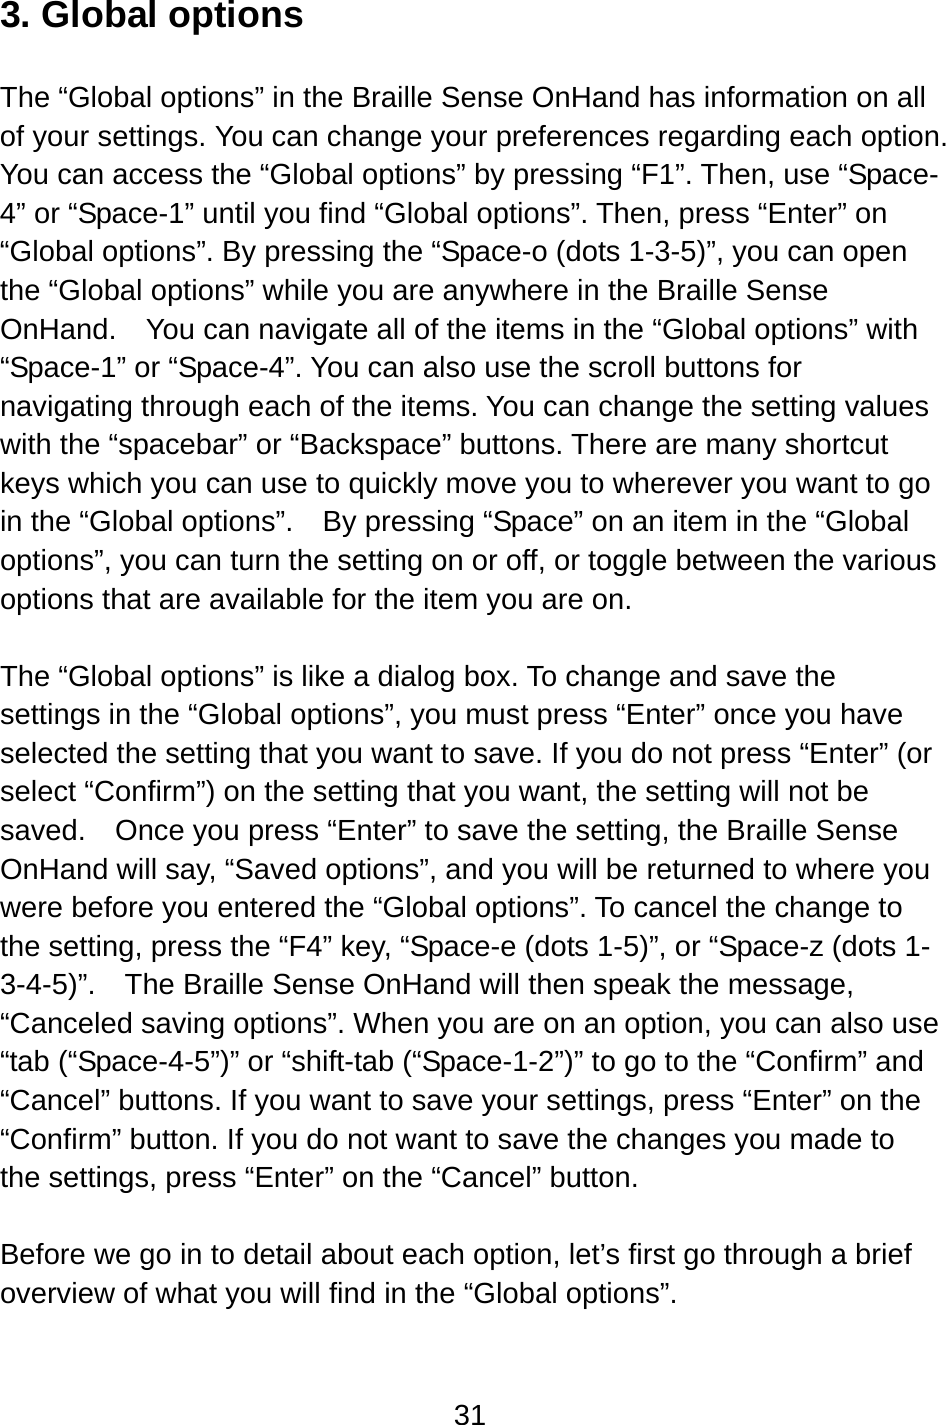 31  3. Global options  The “Global options” in the Braille Sense OnHand has information on all of your settings. You can change your preferences regarding each option.   You can access the “Global options” by pressing “F1”. Then, use “Space-4” or “Space-1” until you find “Global options”. Then, press “Enter” on “Global options”. By pressing the “Space-o (dots 1-3-5)”, you can open the “Global options” while you are anywhere in the Braille Sense OnHand.    You can navigate all of the items in the “Global options” with “Space-1” or “Space-4”. You can also use the scroll buttons for navigating through each of the items. You can change the setting values with the “spacebar” or “Backspace” buttons. There are many shortcut keys which you can use to quickly move you to wherever you want to go in the “Global options”.    By pressing “Space” on an item in the “Global options”, you can turn the setting on or off, or toggle between the various options that are available for the item you are on.  The “Global options” is like a dialog box. To change and save the settings in the “Global options”, you must press “Enter” once you have selected the setting that you want to save. If you do not press “Enter” (or select “Confirm”) on the setting that you want, the setting will not be saved.    Once you press “Enter” to save the setting, the Braille Sense OnHand will say, “Saved options”, and you will be returned to where you were before you entered the “Global options”. To cancel the change to the setting, press the “F4” key, “Space-e (dots 1-5)”, or “Space-z (dots 1-3-4-5)”.  The Braille Sense OnHand will then speak the message, “Canceled saving options”. When you are on an option, you can also use “tab (“Space-4-5”)” or “shift-tab (“Space-1-2”)” to go to the “Confirm” and “Cancel” buttons. If you want to save your settings, press “Enter” on the “Confirm” button. If you do not want to save the changes you made to the settings, press “Enter” on the “Cancel” button.  Before we go in to detail about each option, let’s first go through a brief overview of what you will find in the “Global options”.  